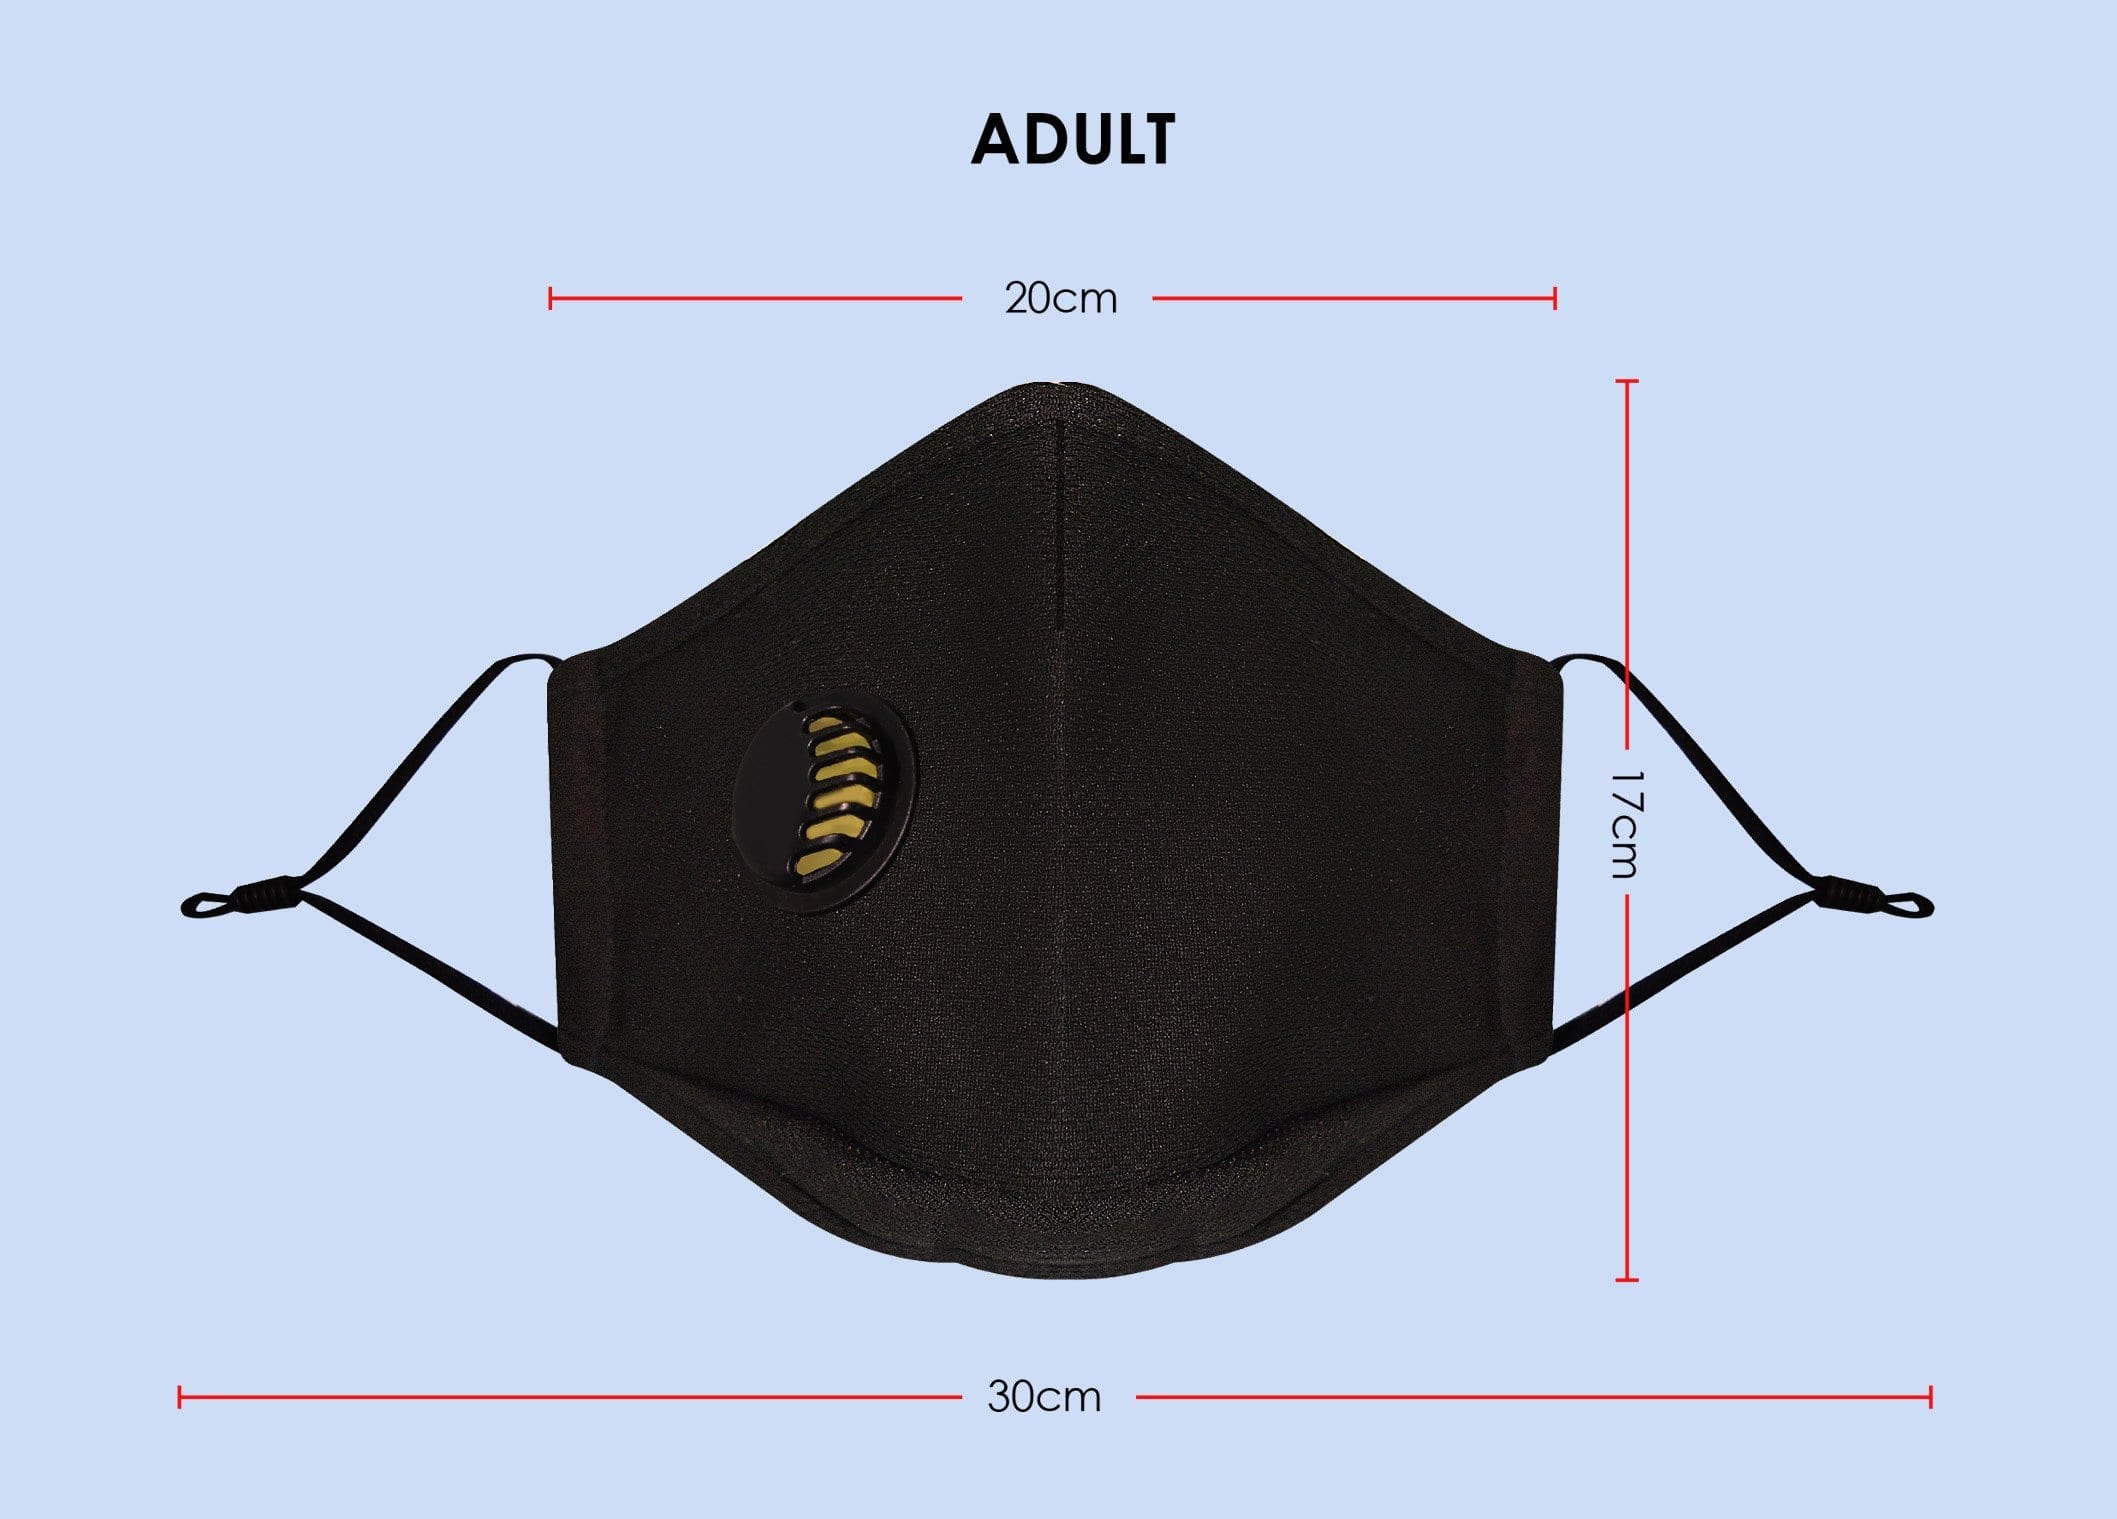 Air Mask Adult Size Measurement protection